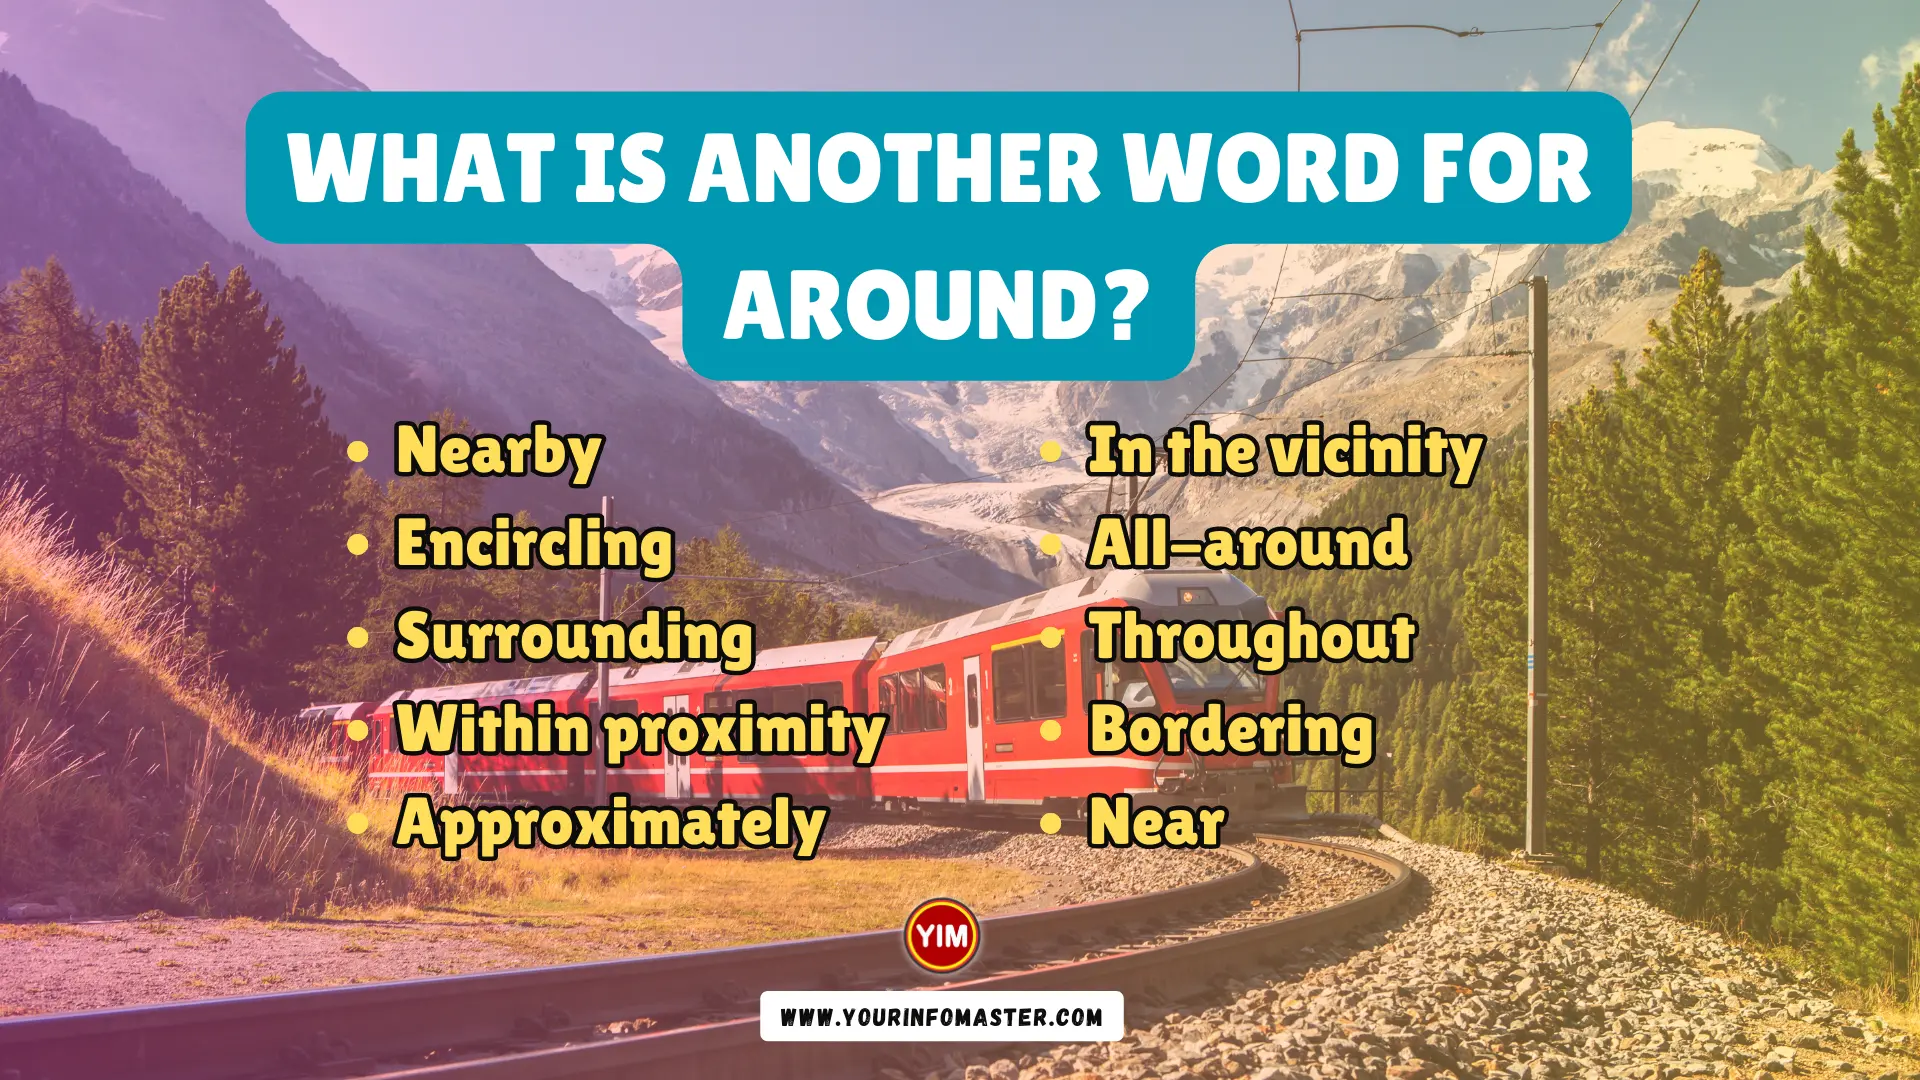 What is another word for Around